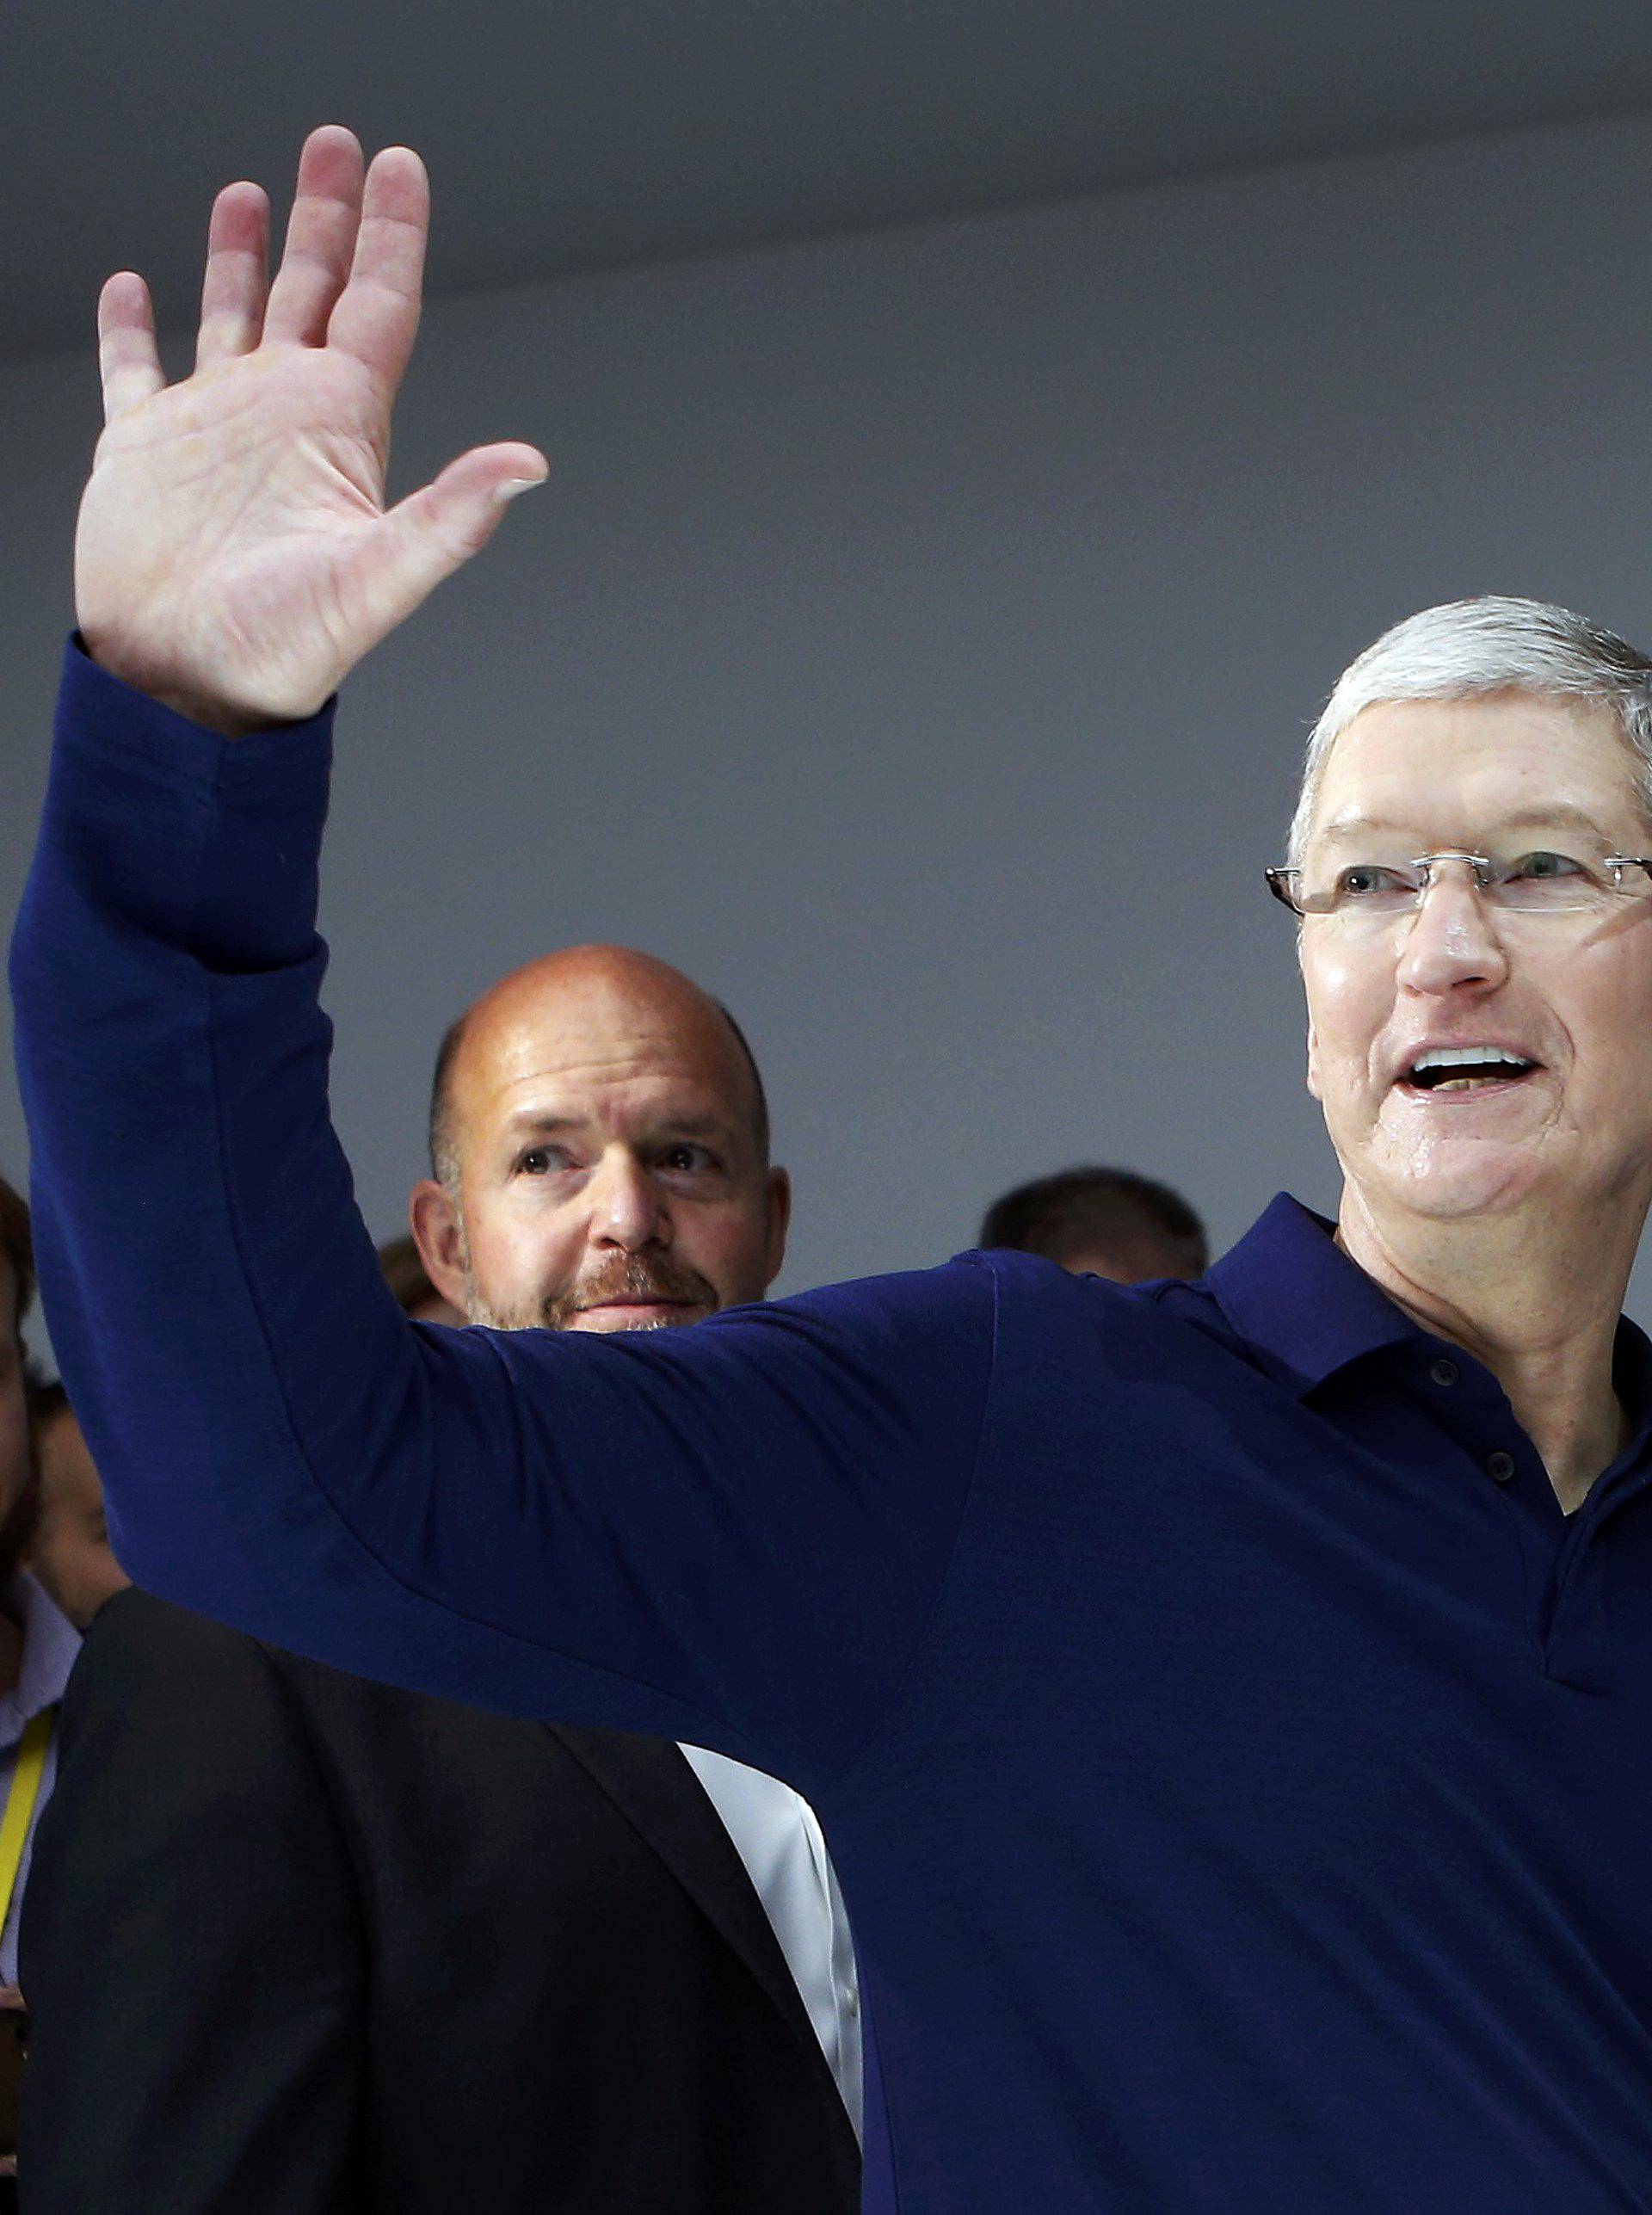 Tim Cook waves during an Apple media event in San Francisco